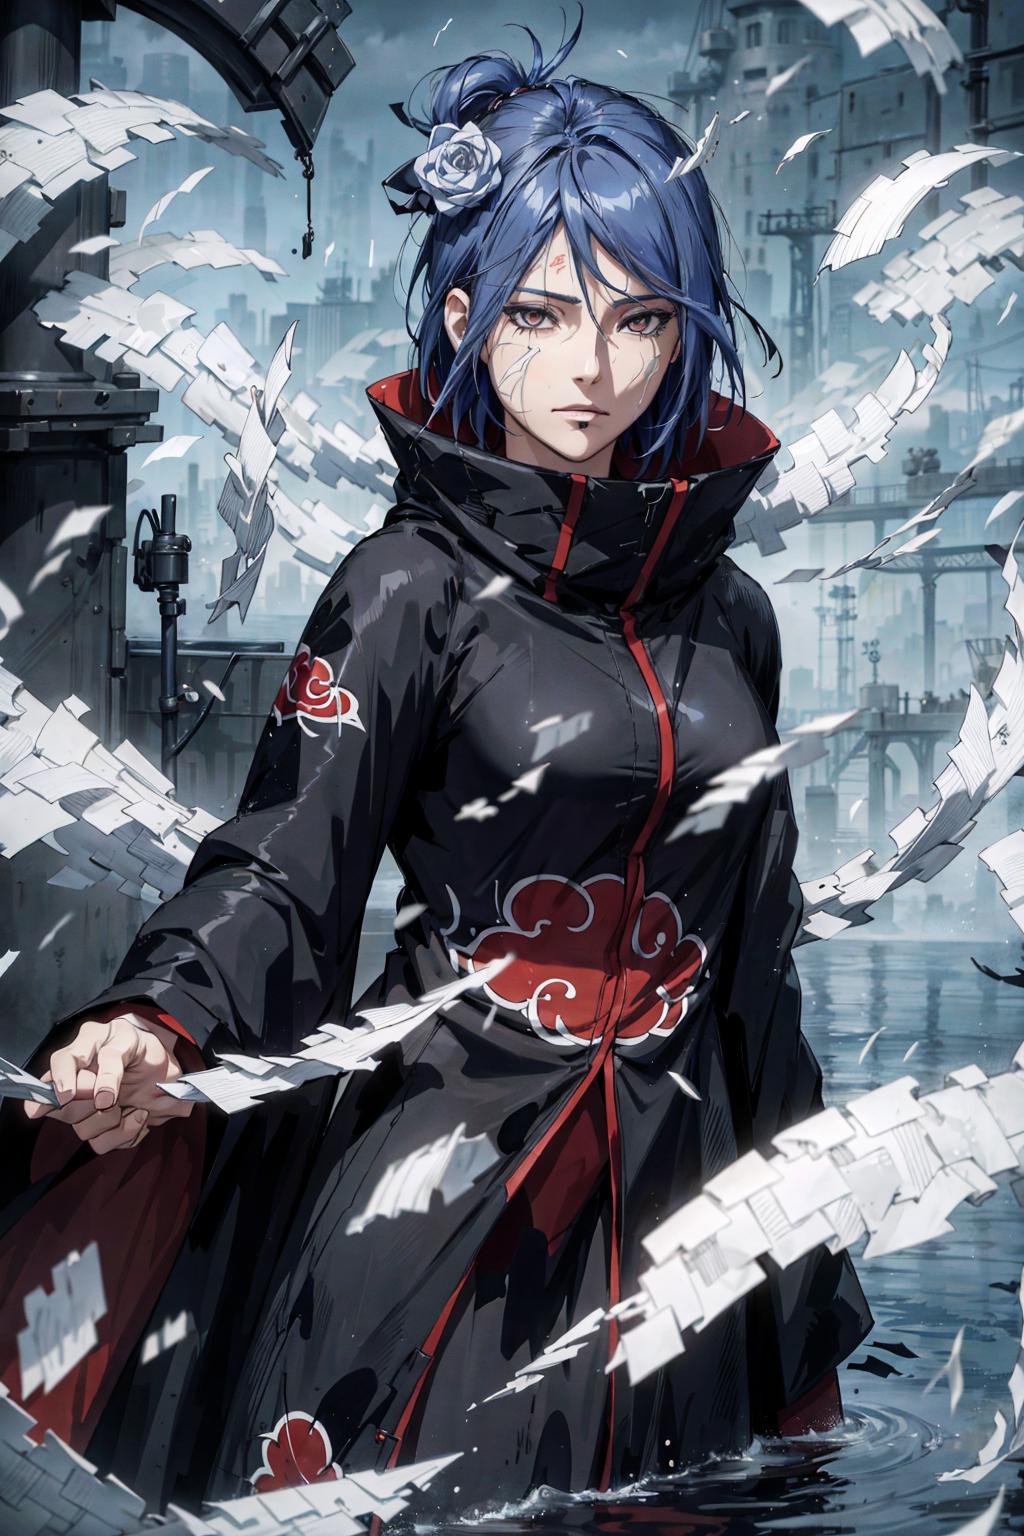 Anime character with a black coat and a red circle on her chest.